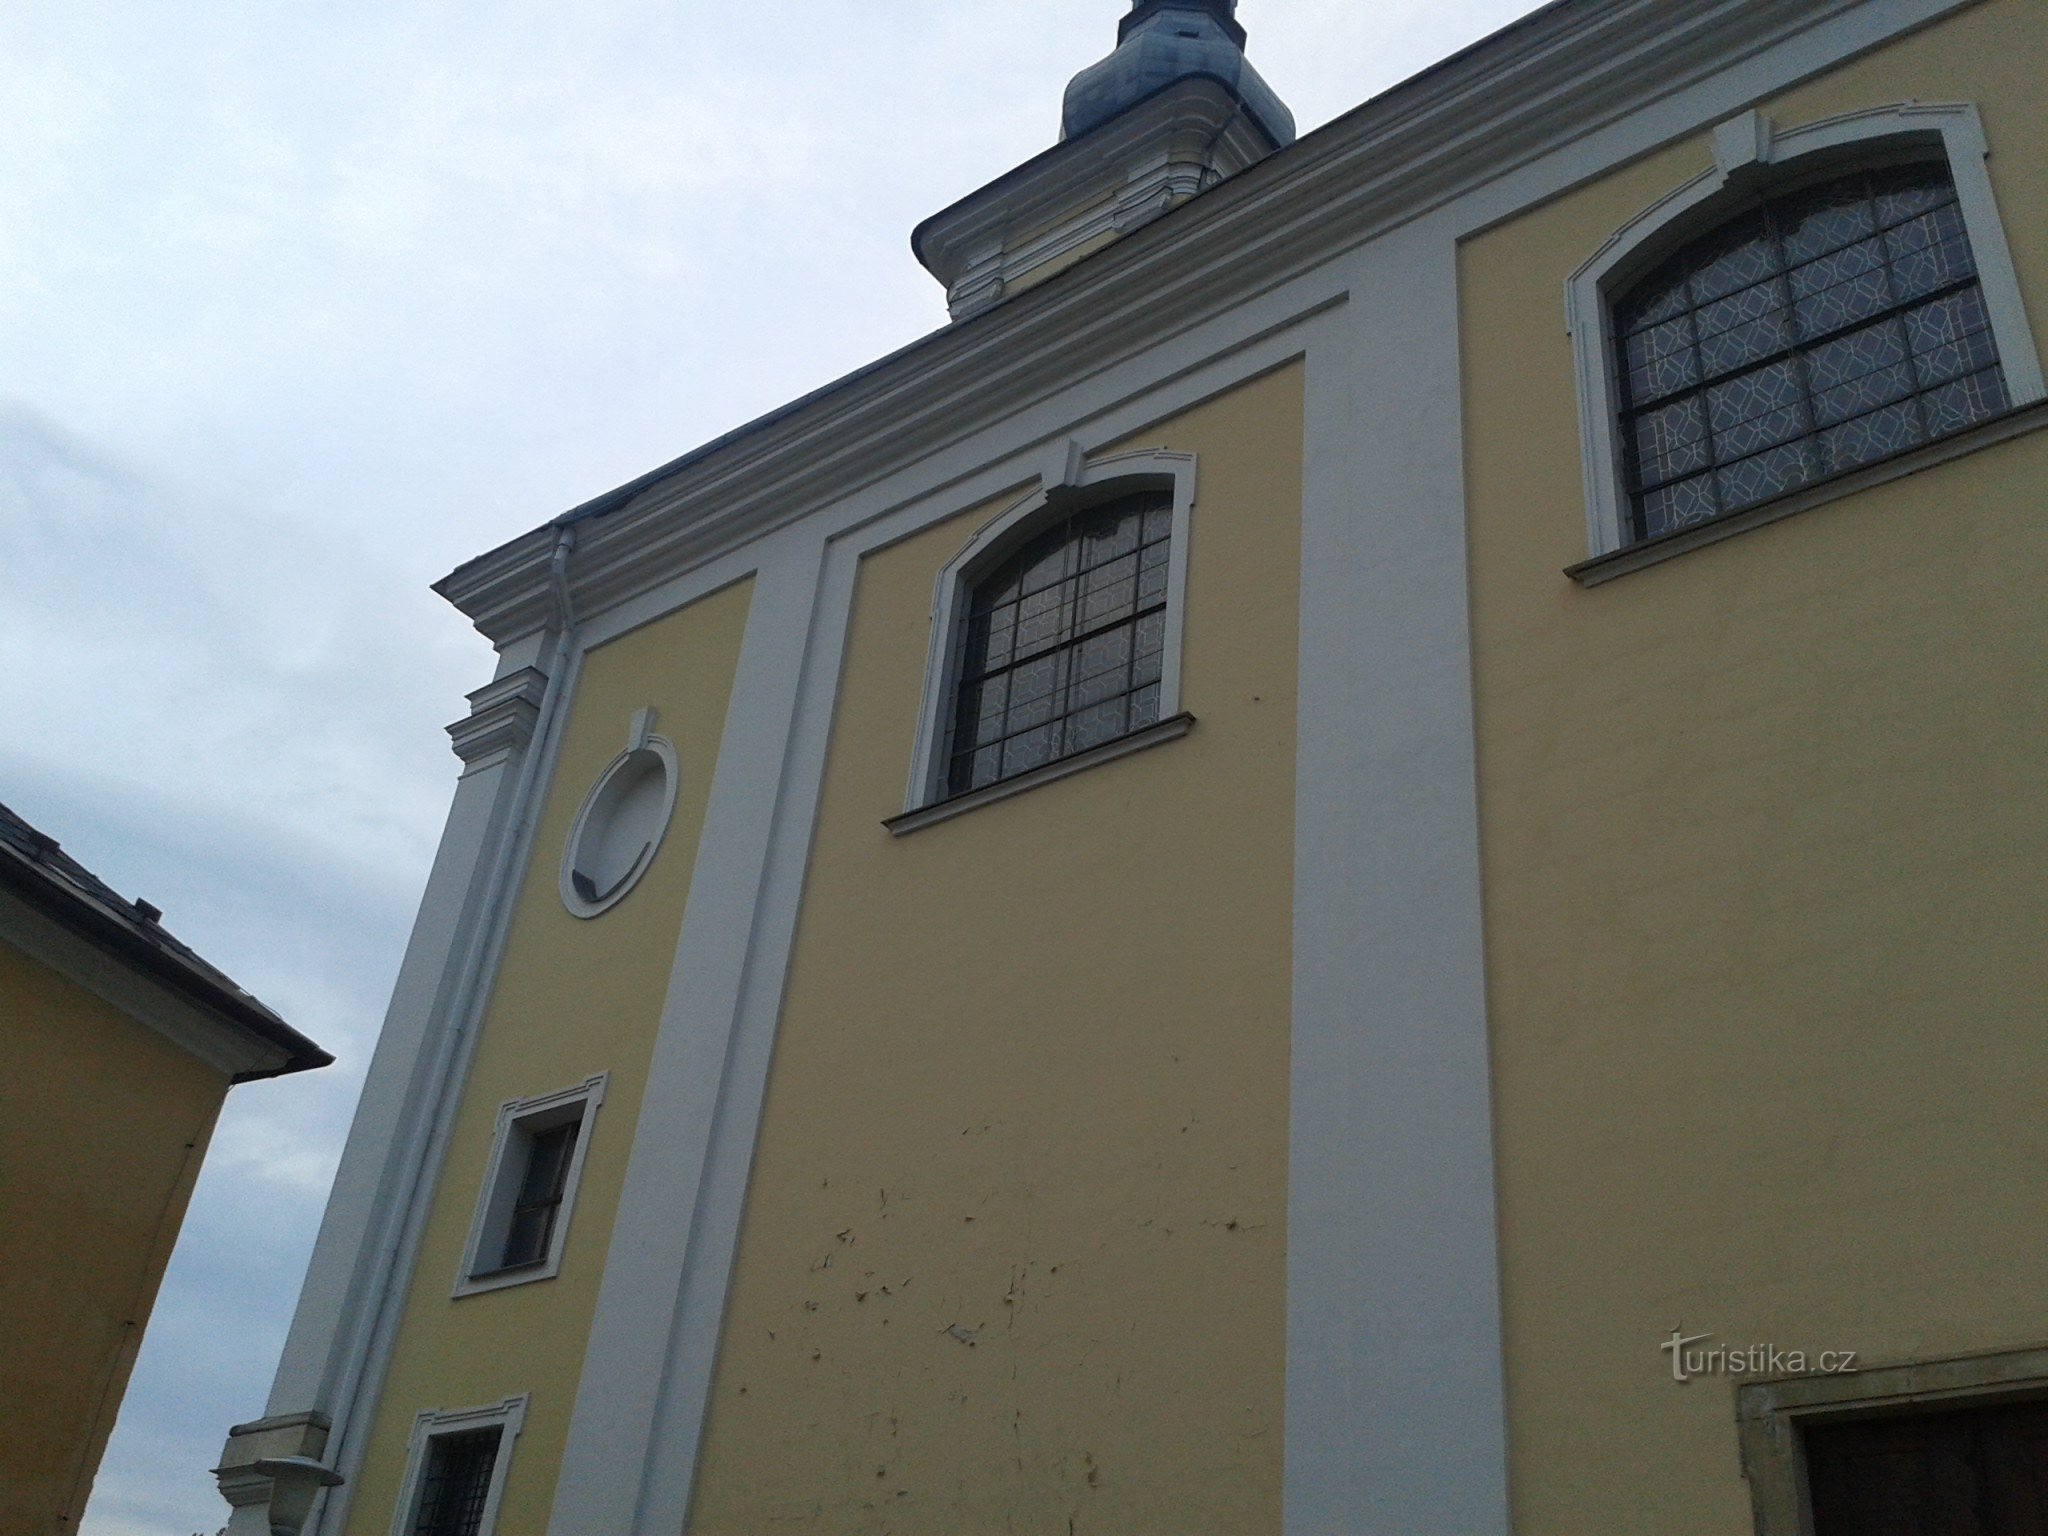 Zábřeh (na Mor.) - St. Bartholomew's church from the outside and from the inside (addition 19.3.16) + parish